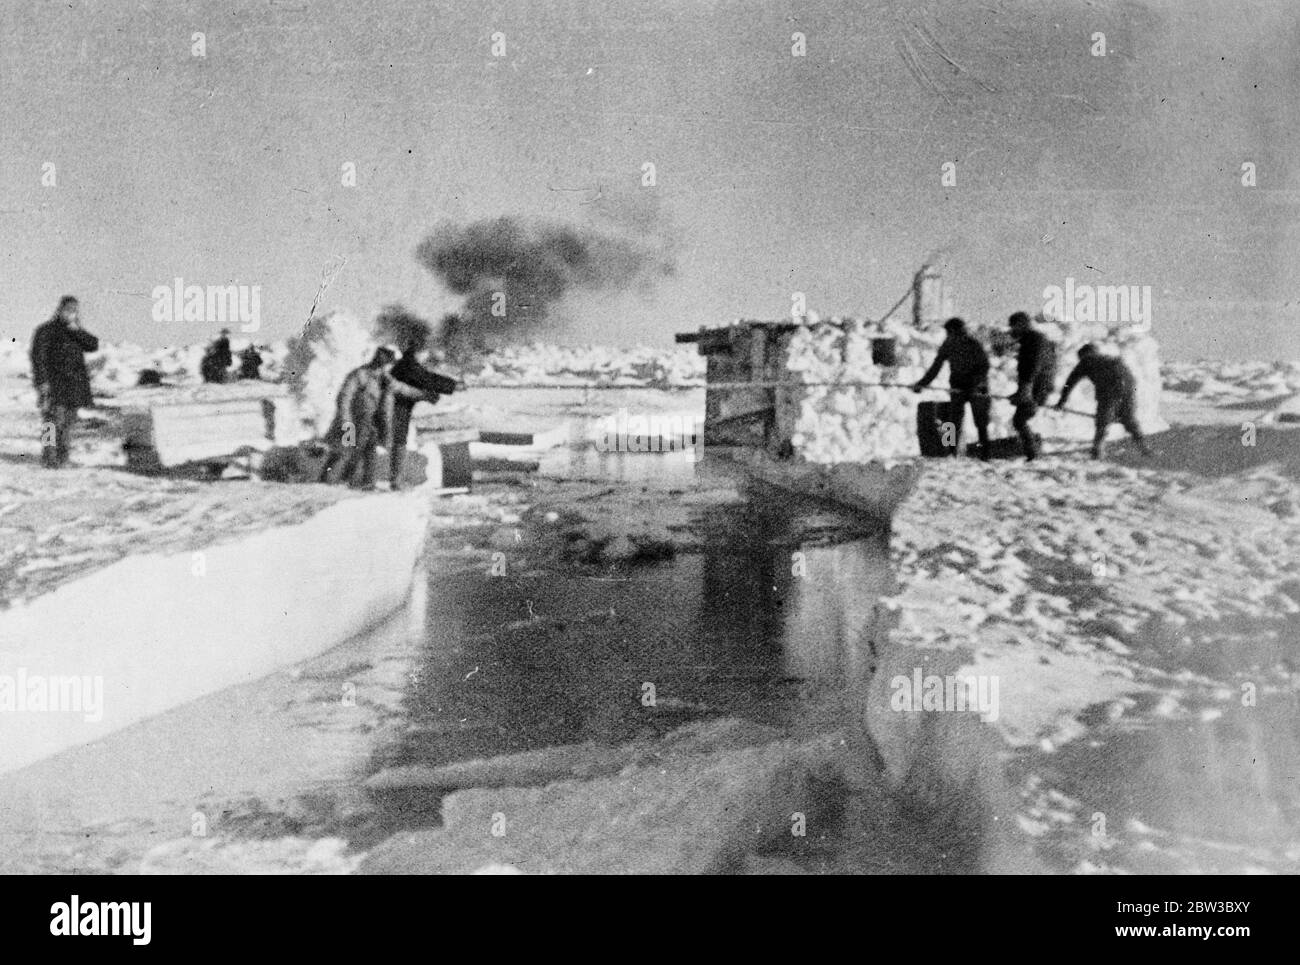 SS Chelyuskin , a Soviet steamship sent out on an expedition to navigate through polar ice along the Northern Maritime Route from Murmansk to Vladivostok , has became ice-bound in Arctic waters during navigation . It was caught in the ice fields in September. After that it drifted in the ice pack before sinking on February 13 , 1934, crushed by the icepacks near Kolyuchin Island in the Chukchi Sea . The crew managed to escape onto the ice and built a makeshift airstrip using only a few spades , ice shovels and two crowbars , which helped in the rescue of the crew . Fifty three men walked over Stock Photo